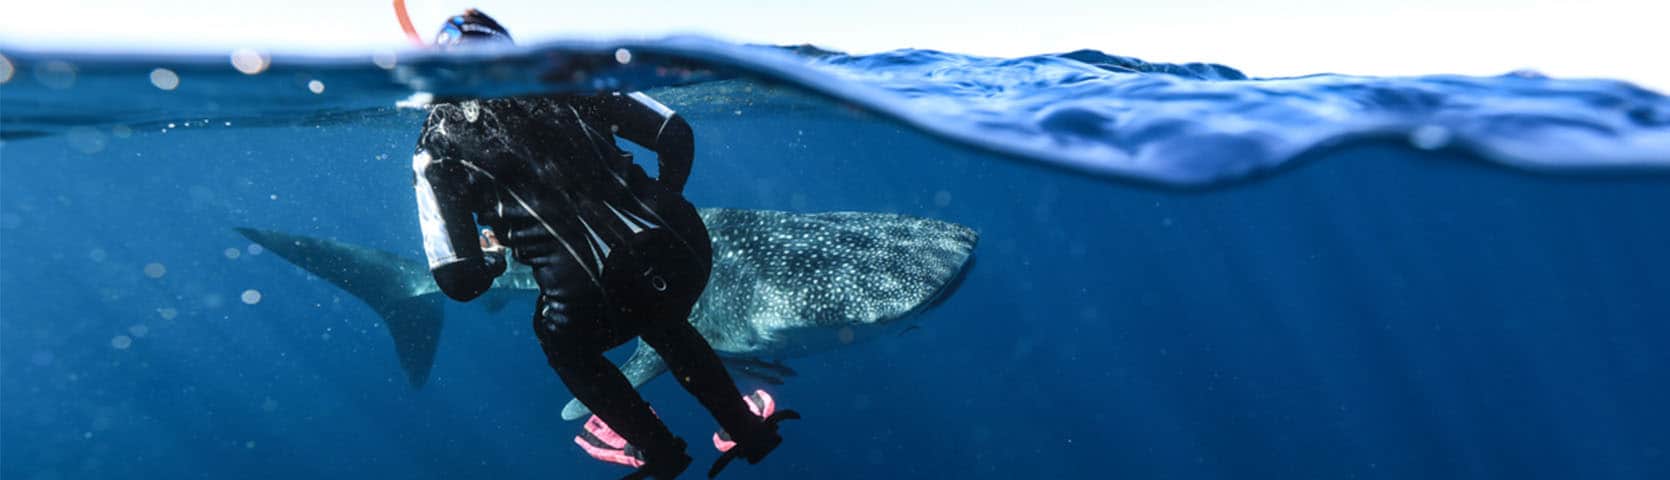 Swim with whale sharks at Ningaloo Reef with Coral Expeditions